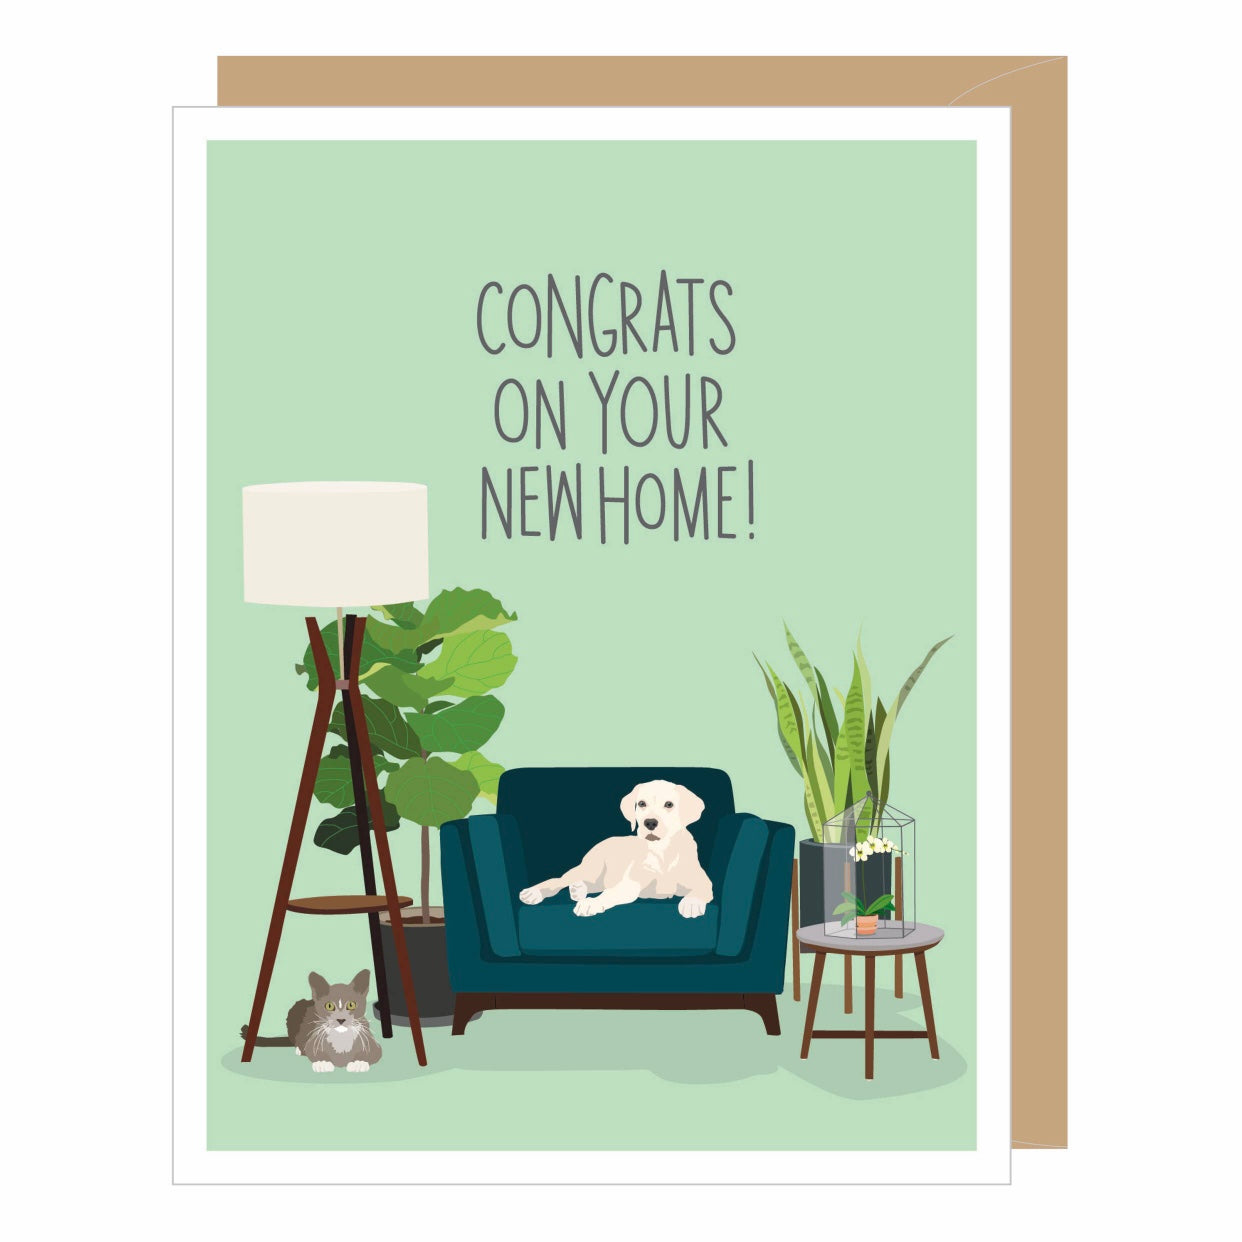 Congrats on your new home greeting card